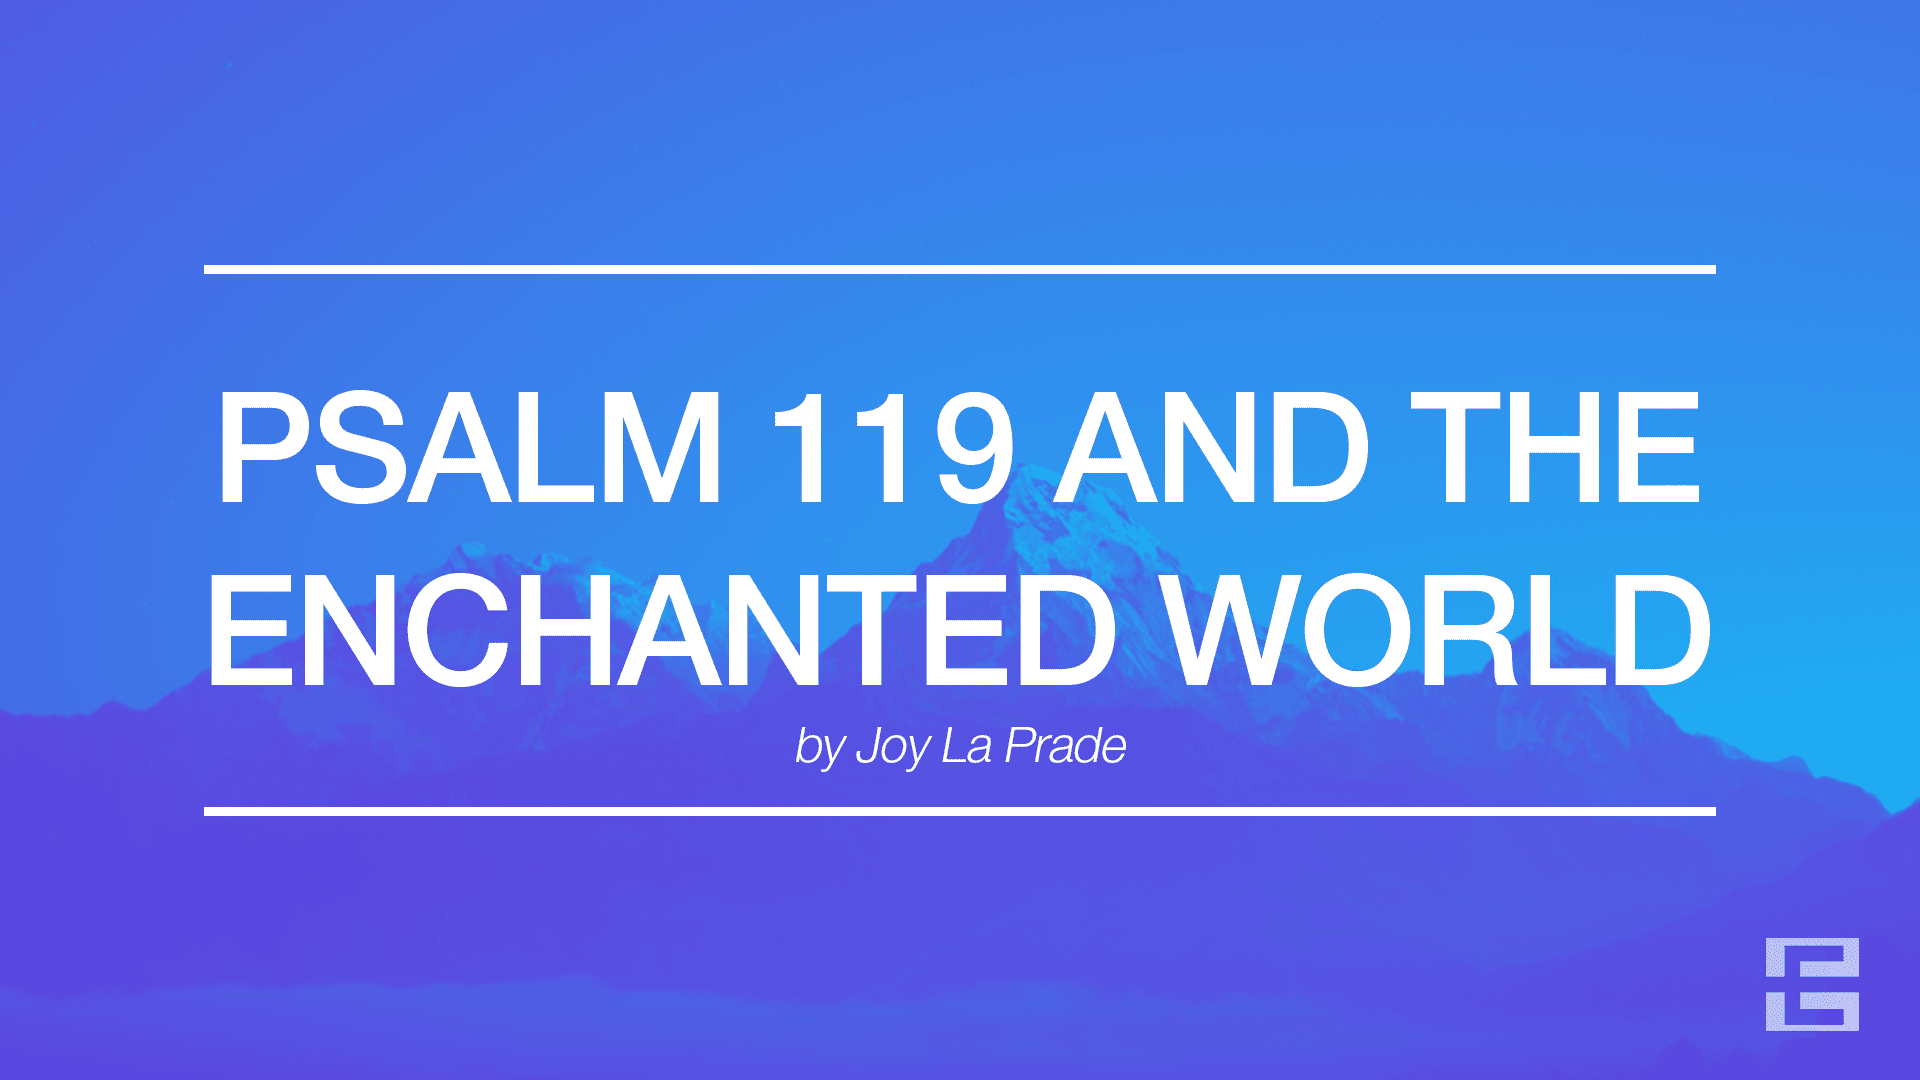 Psalm 119 and the Enchanted World